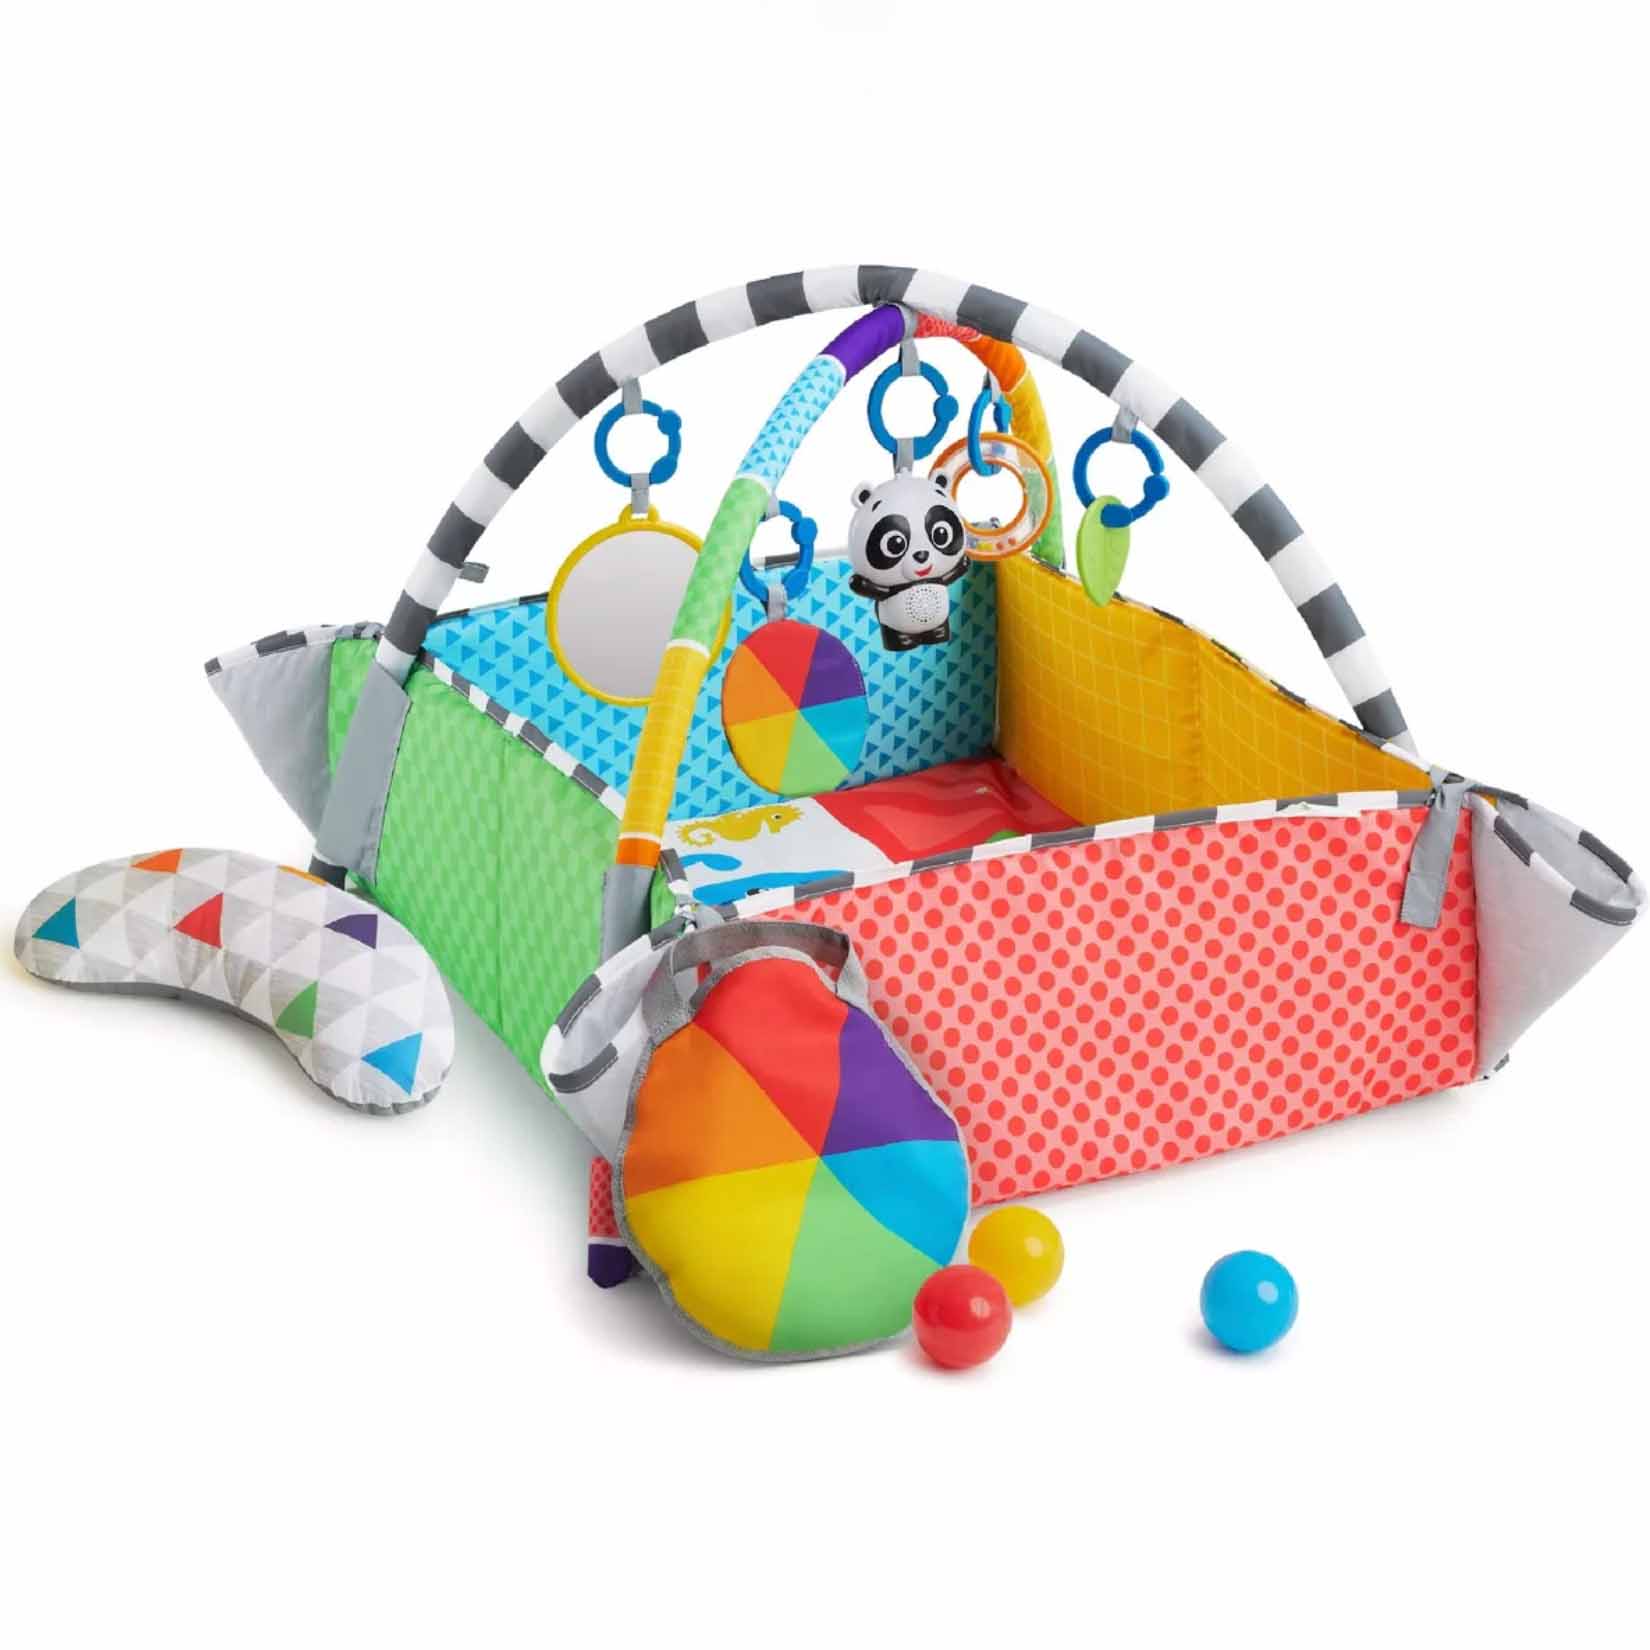 Colorful playmat with accessories